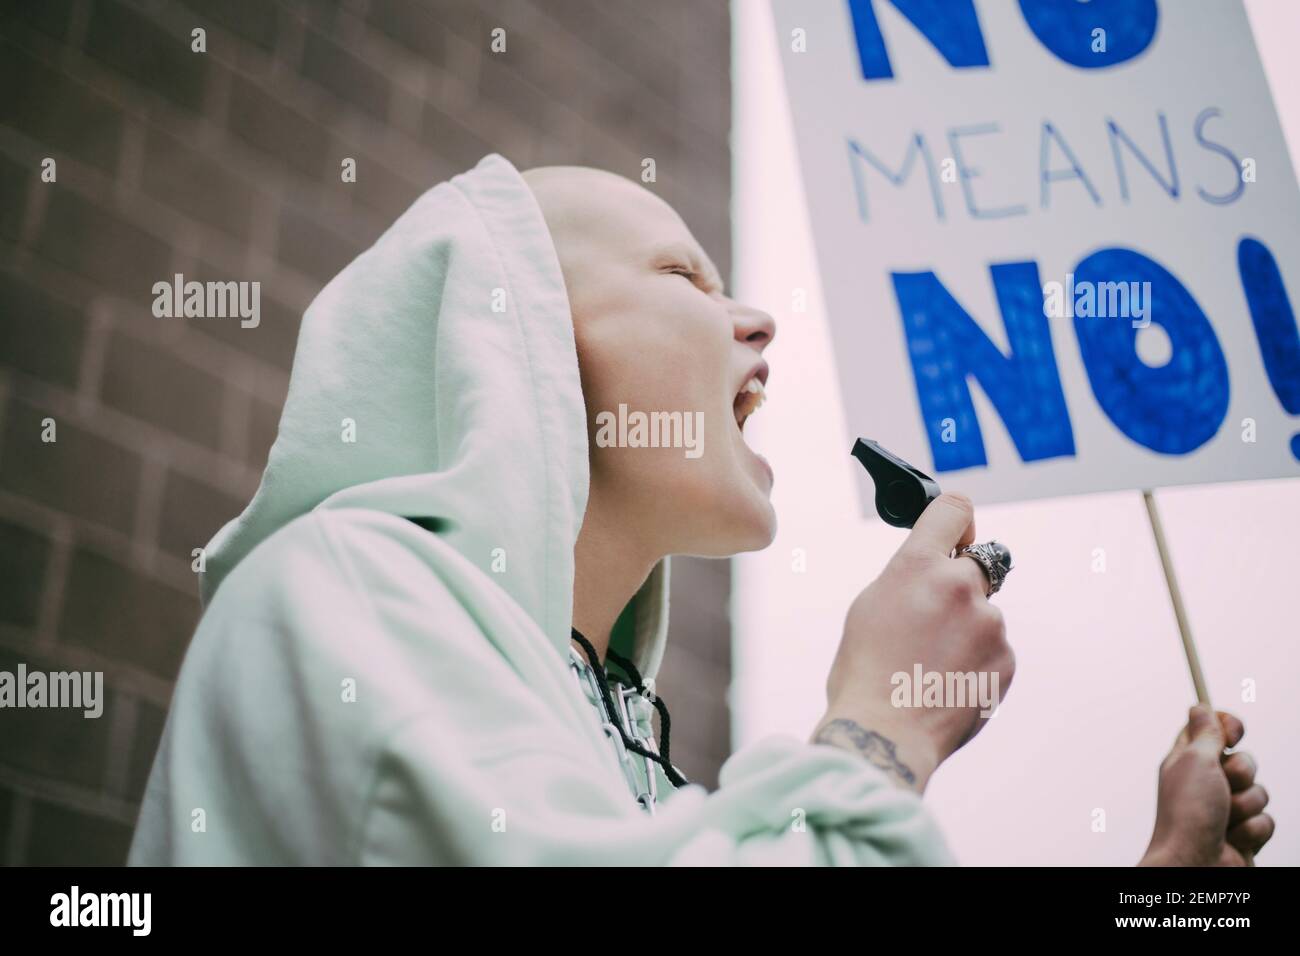 Female activist screaming with signboard during social movement Stock Photo